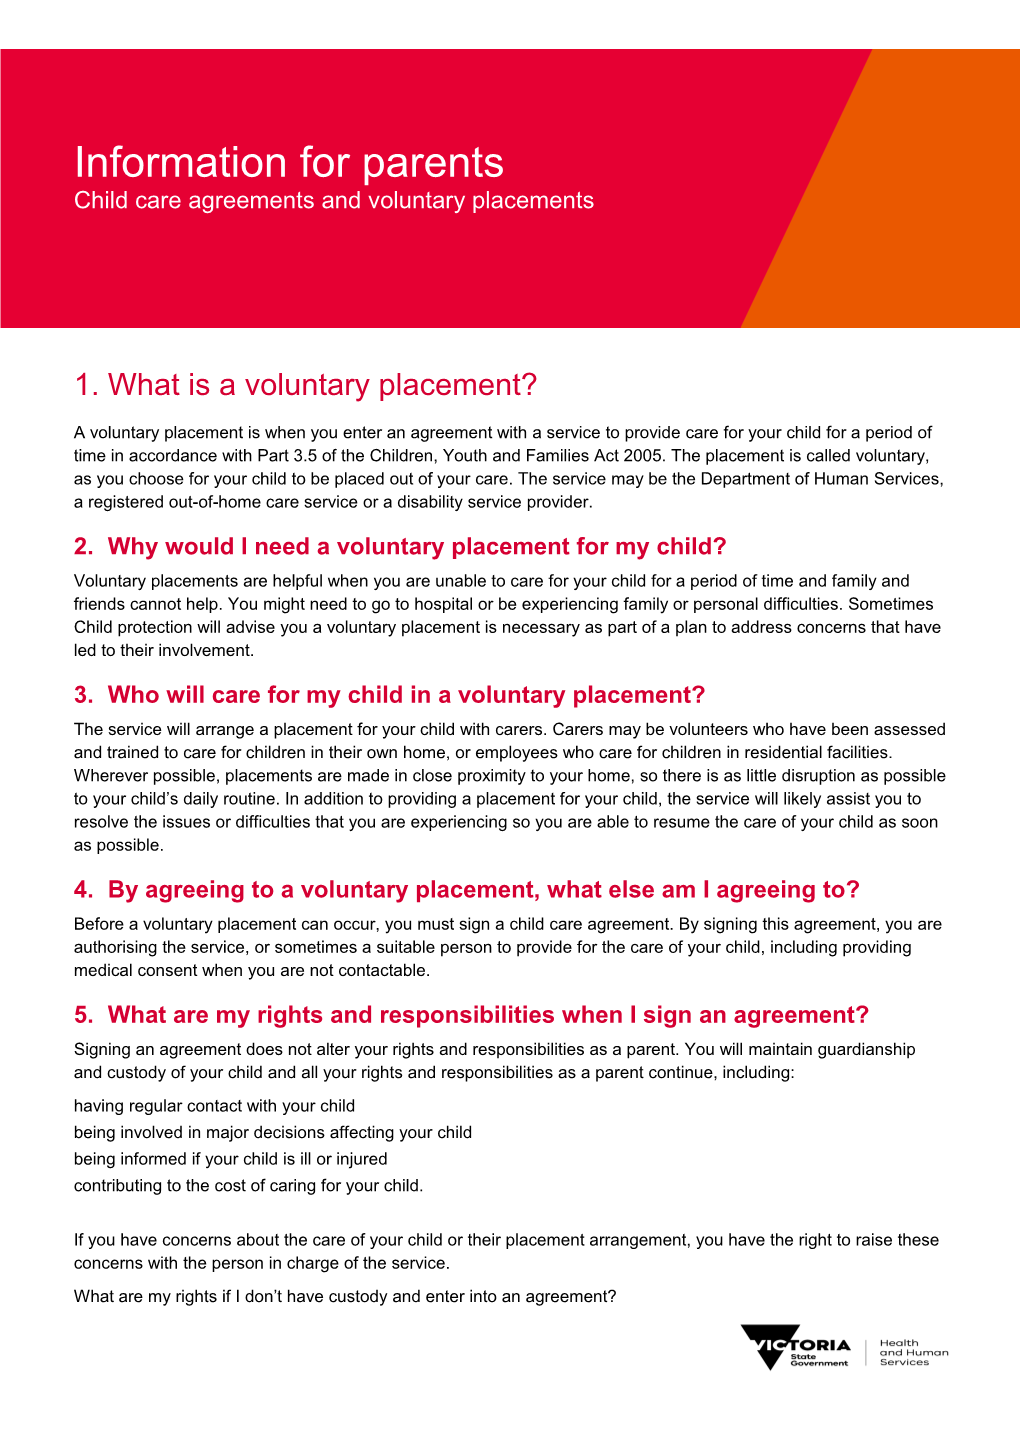 Information for Parents: Child Care Agreements and Voluntary Placements